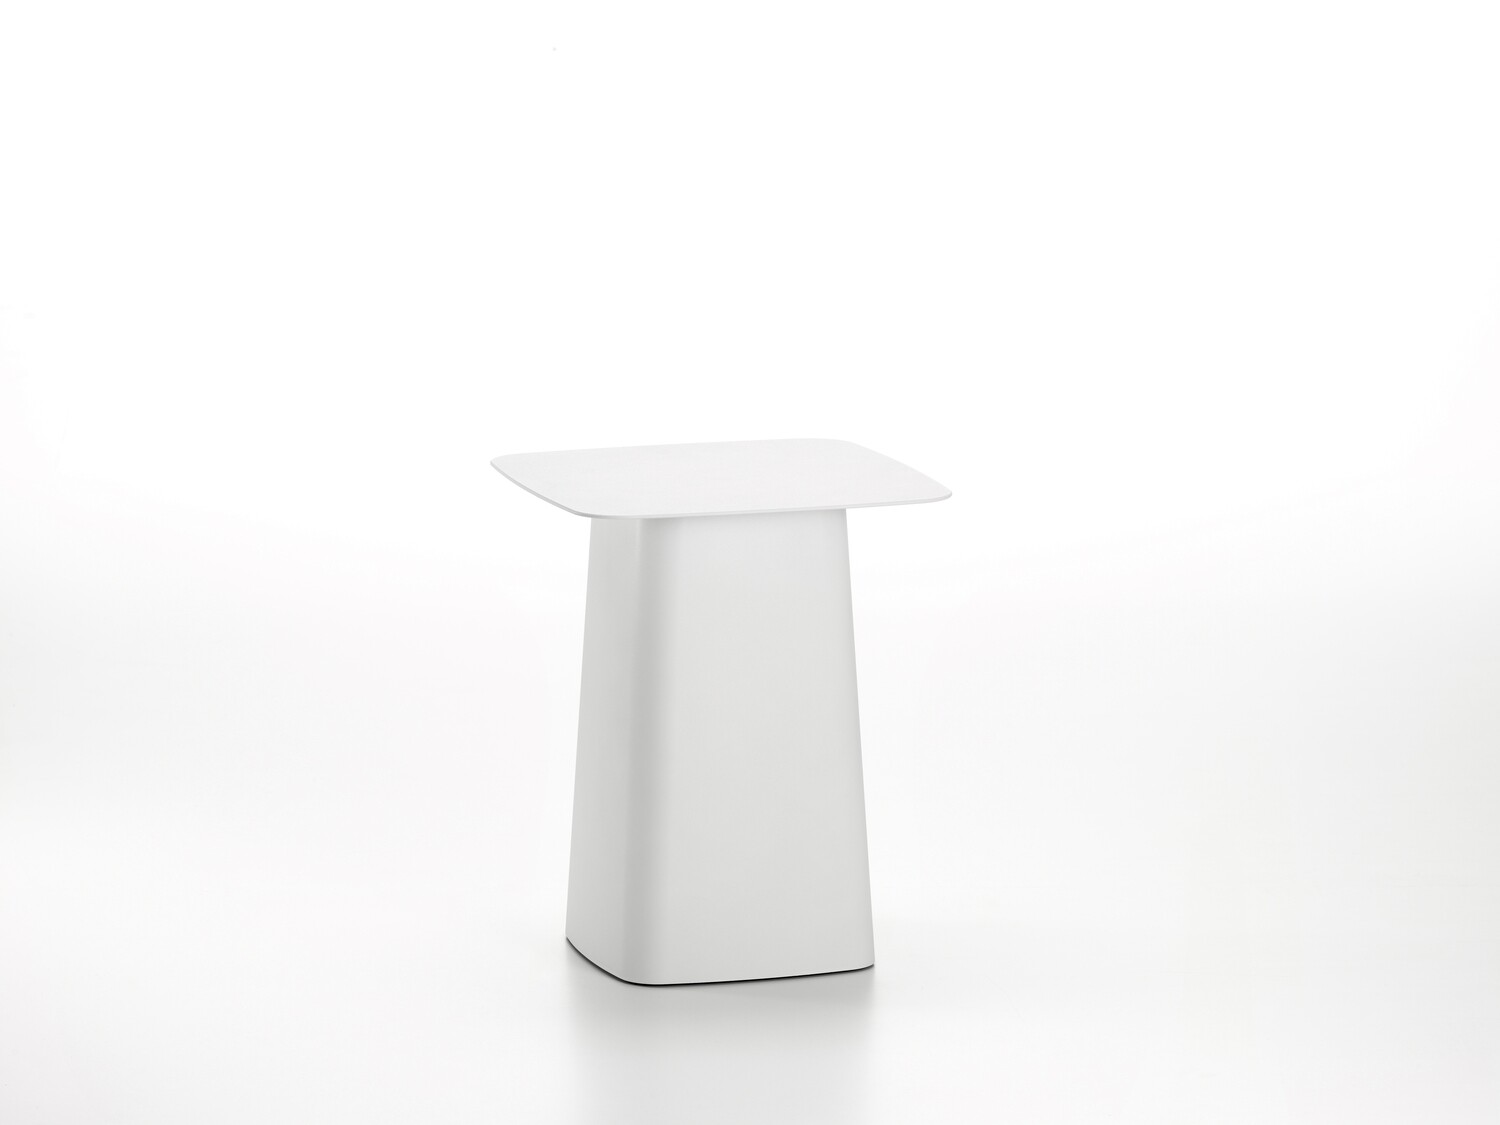 Vitra Metal Side Table, Size: Small, Colour: Galvanized